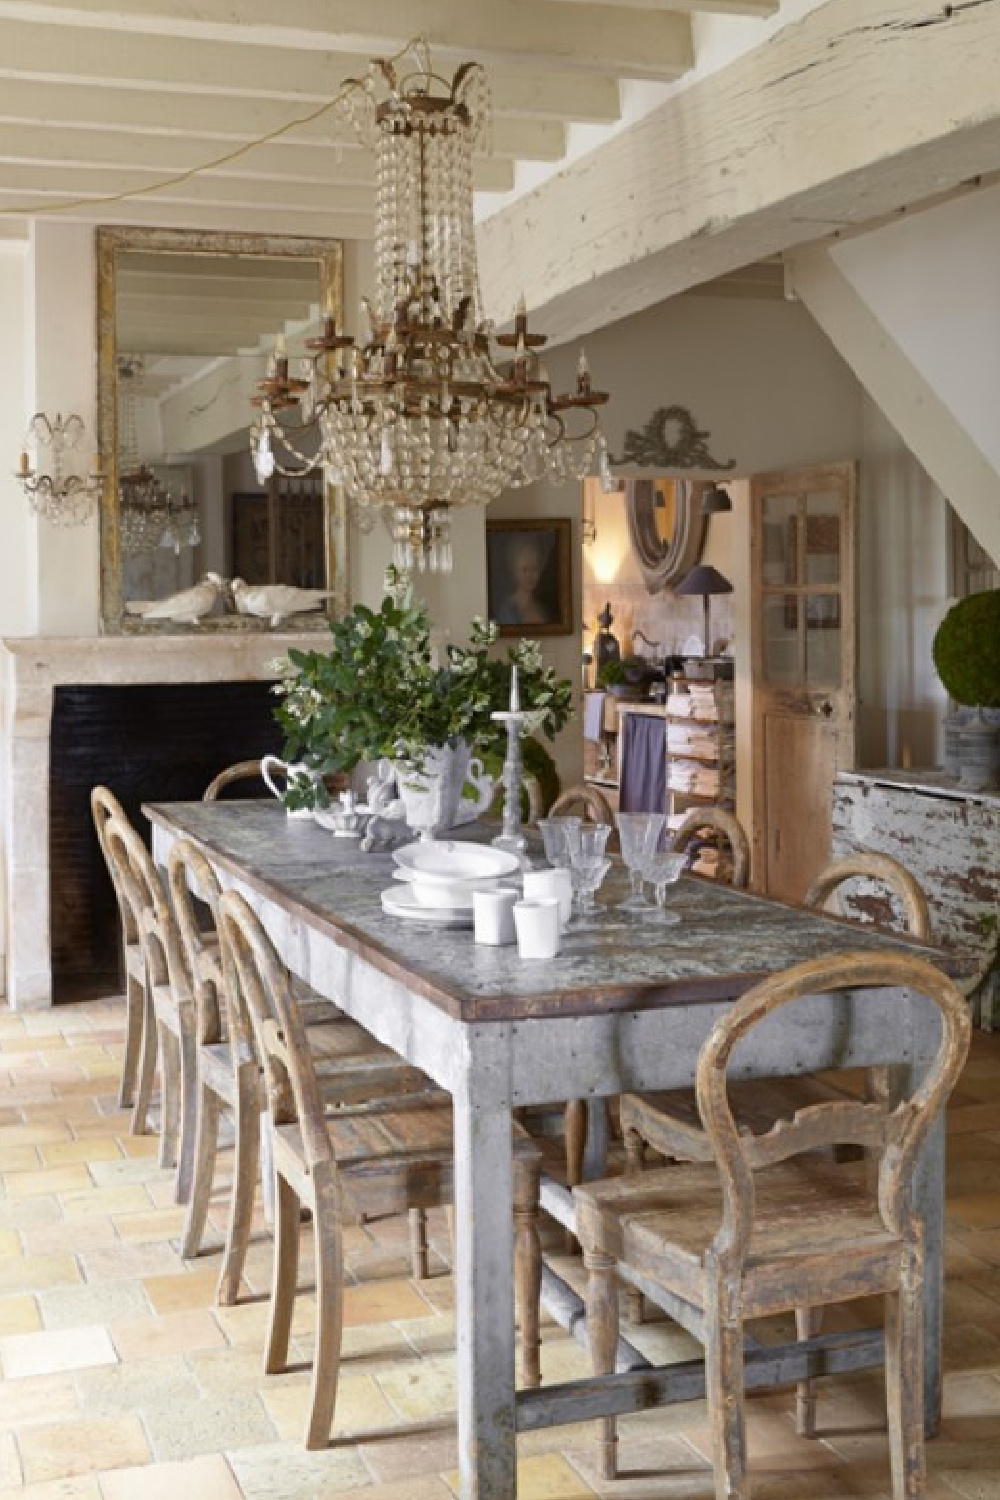 Rustic elegant French country home near Paris belonging to Sophie Lambert, antique lover and shop owner of Autemps des Cerises. #countryfrenchhome #frenchnordic #scandinavianantiques